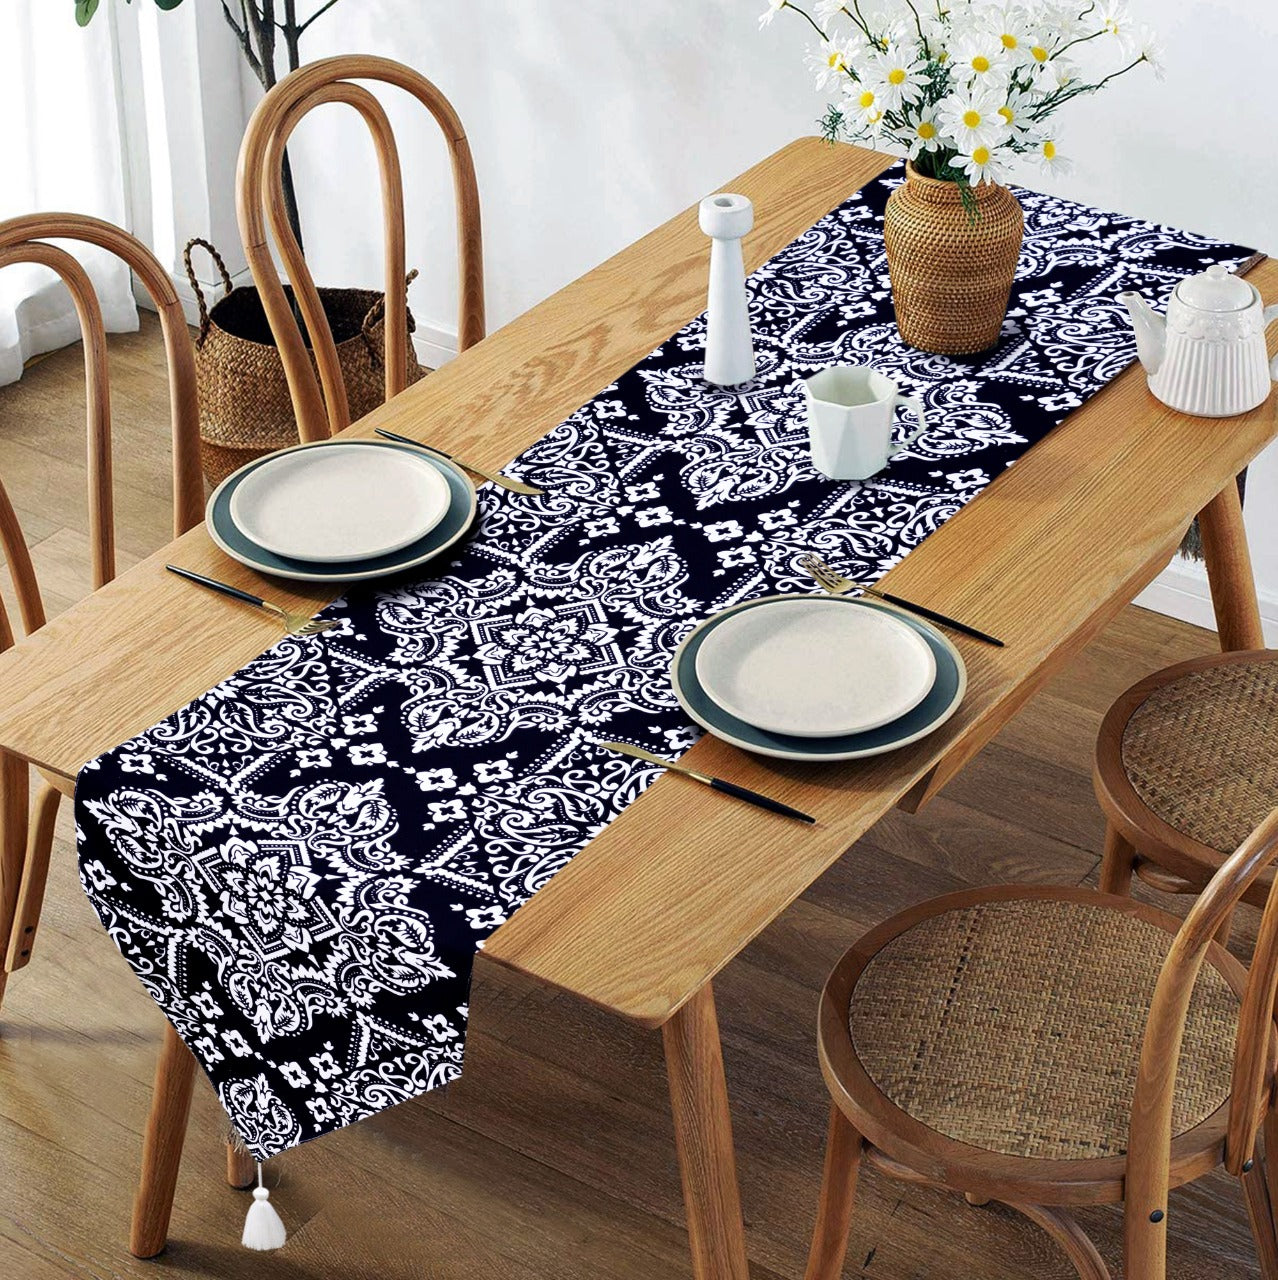 6 & 8 Seater Dining Table Runner-Moroccans Apricot